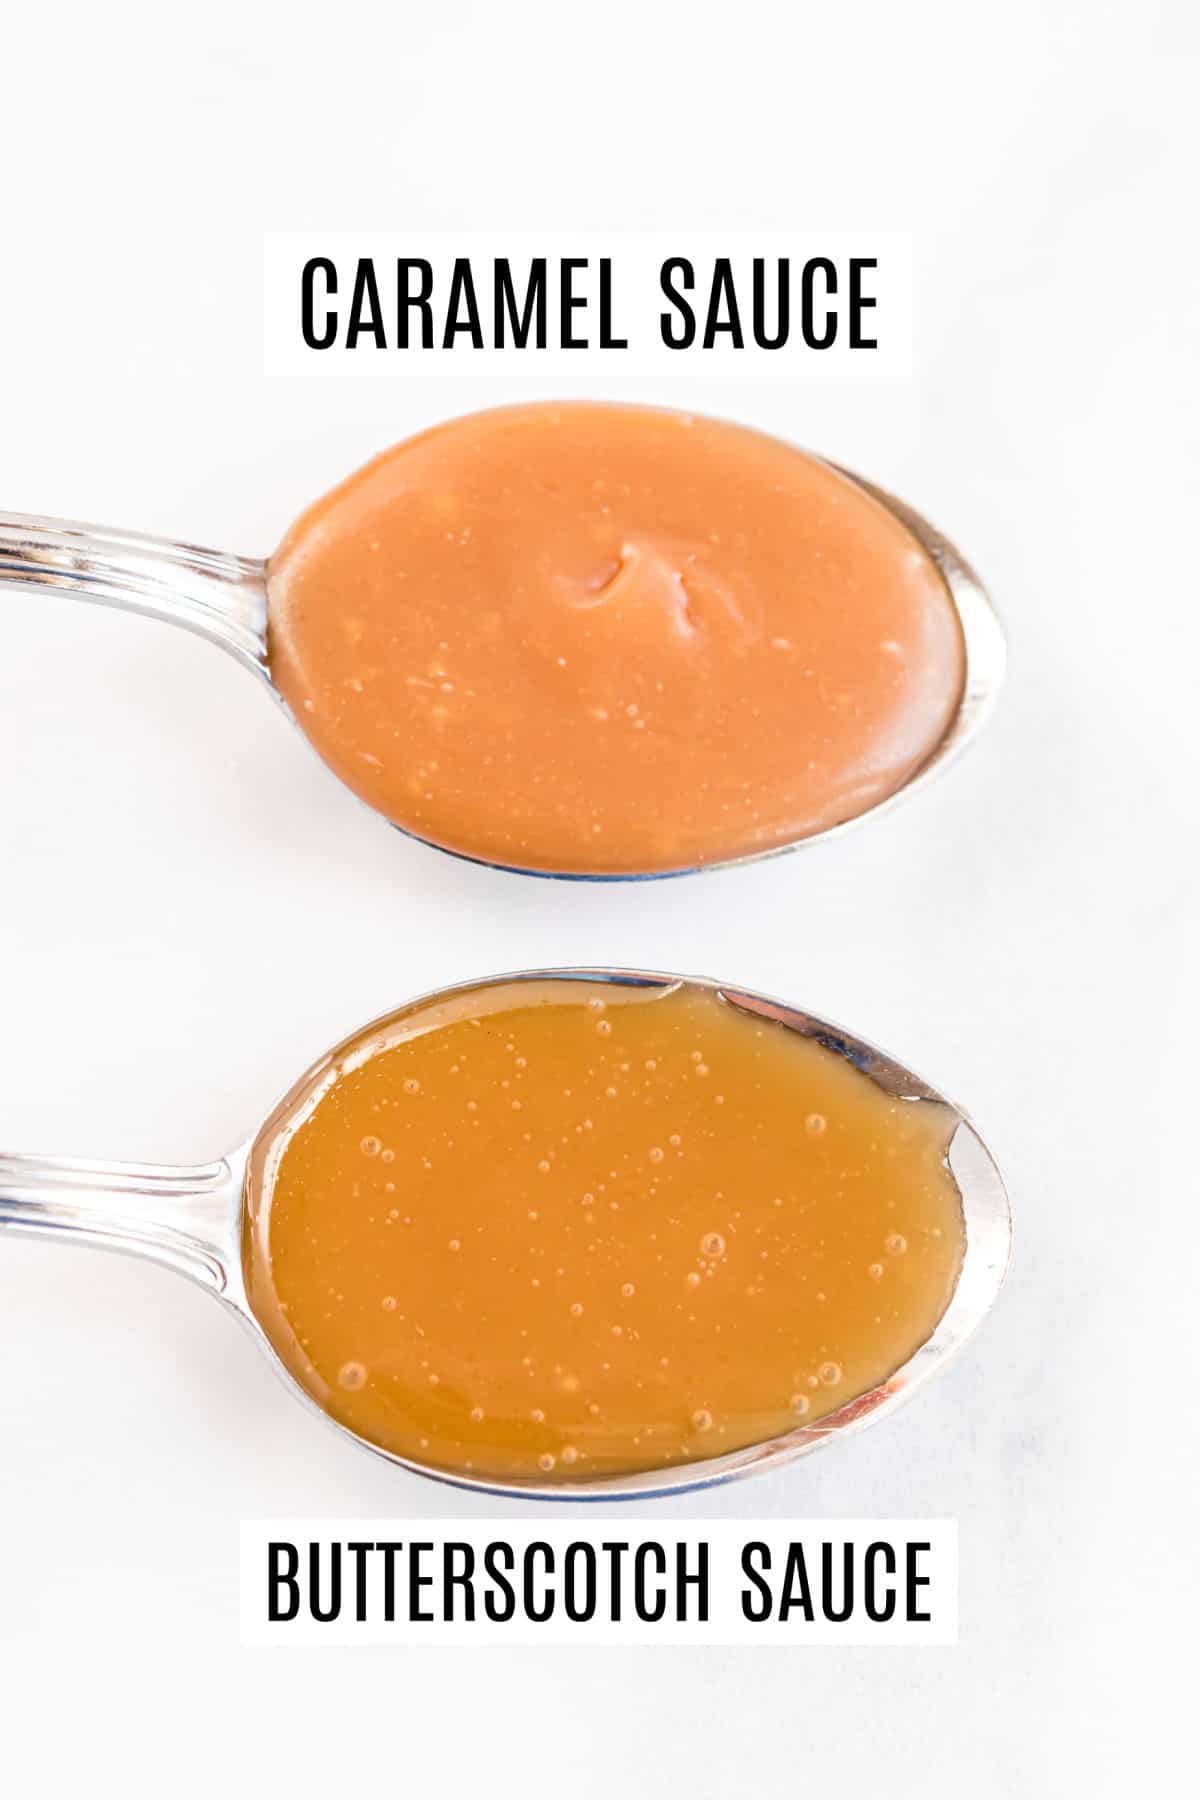 Two spoons showing the difference between caramel and butterscotch sauces.